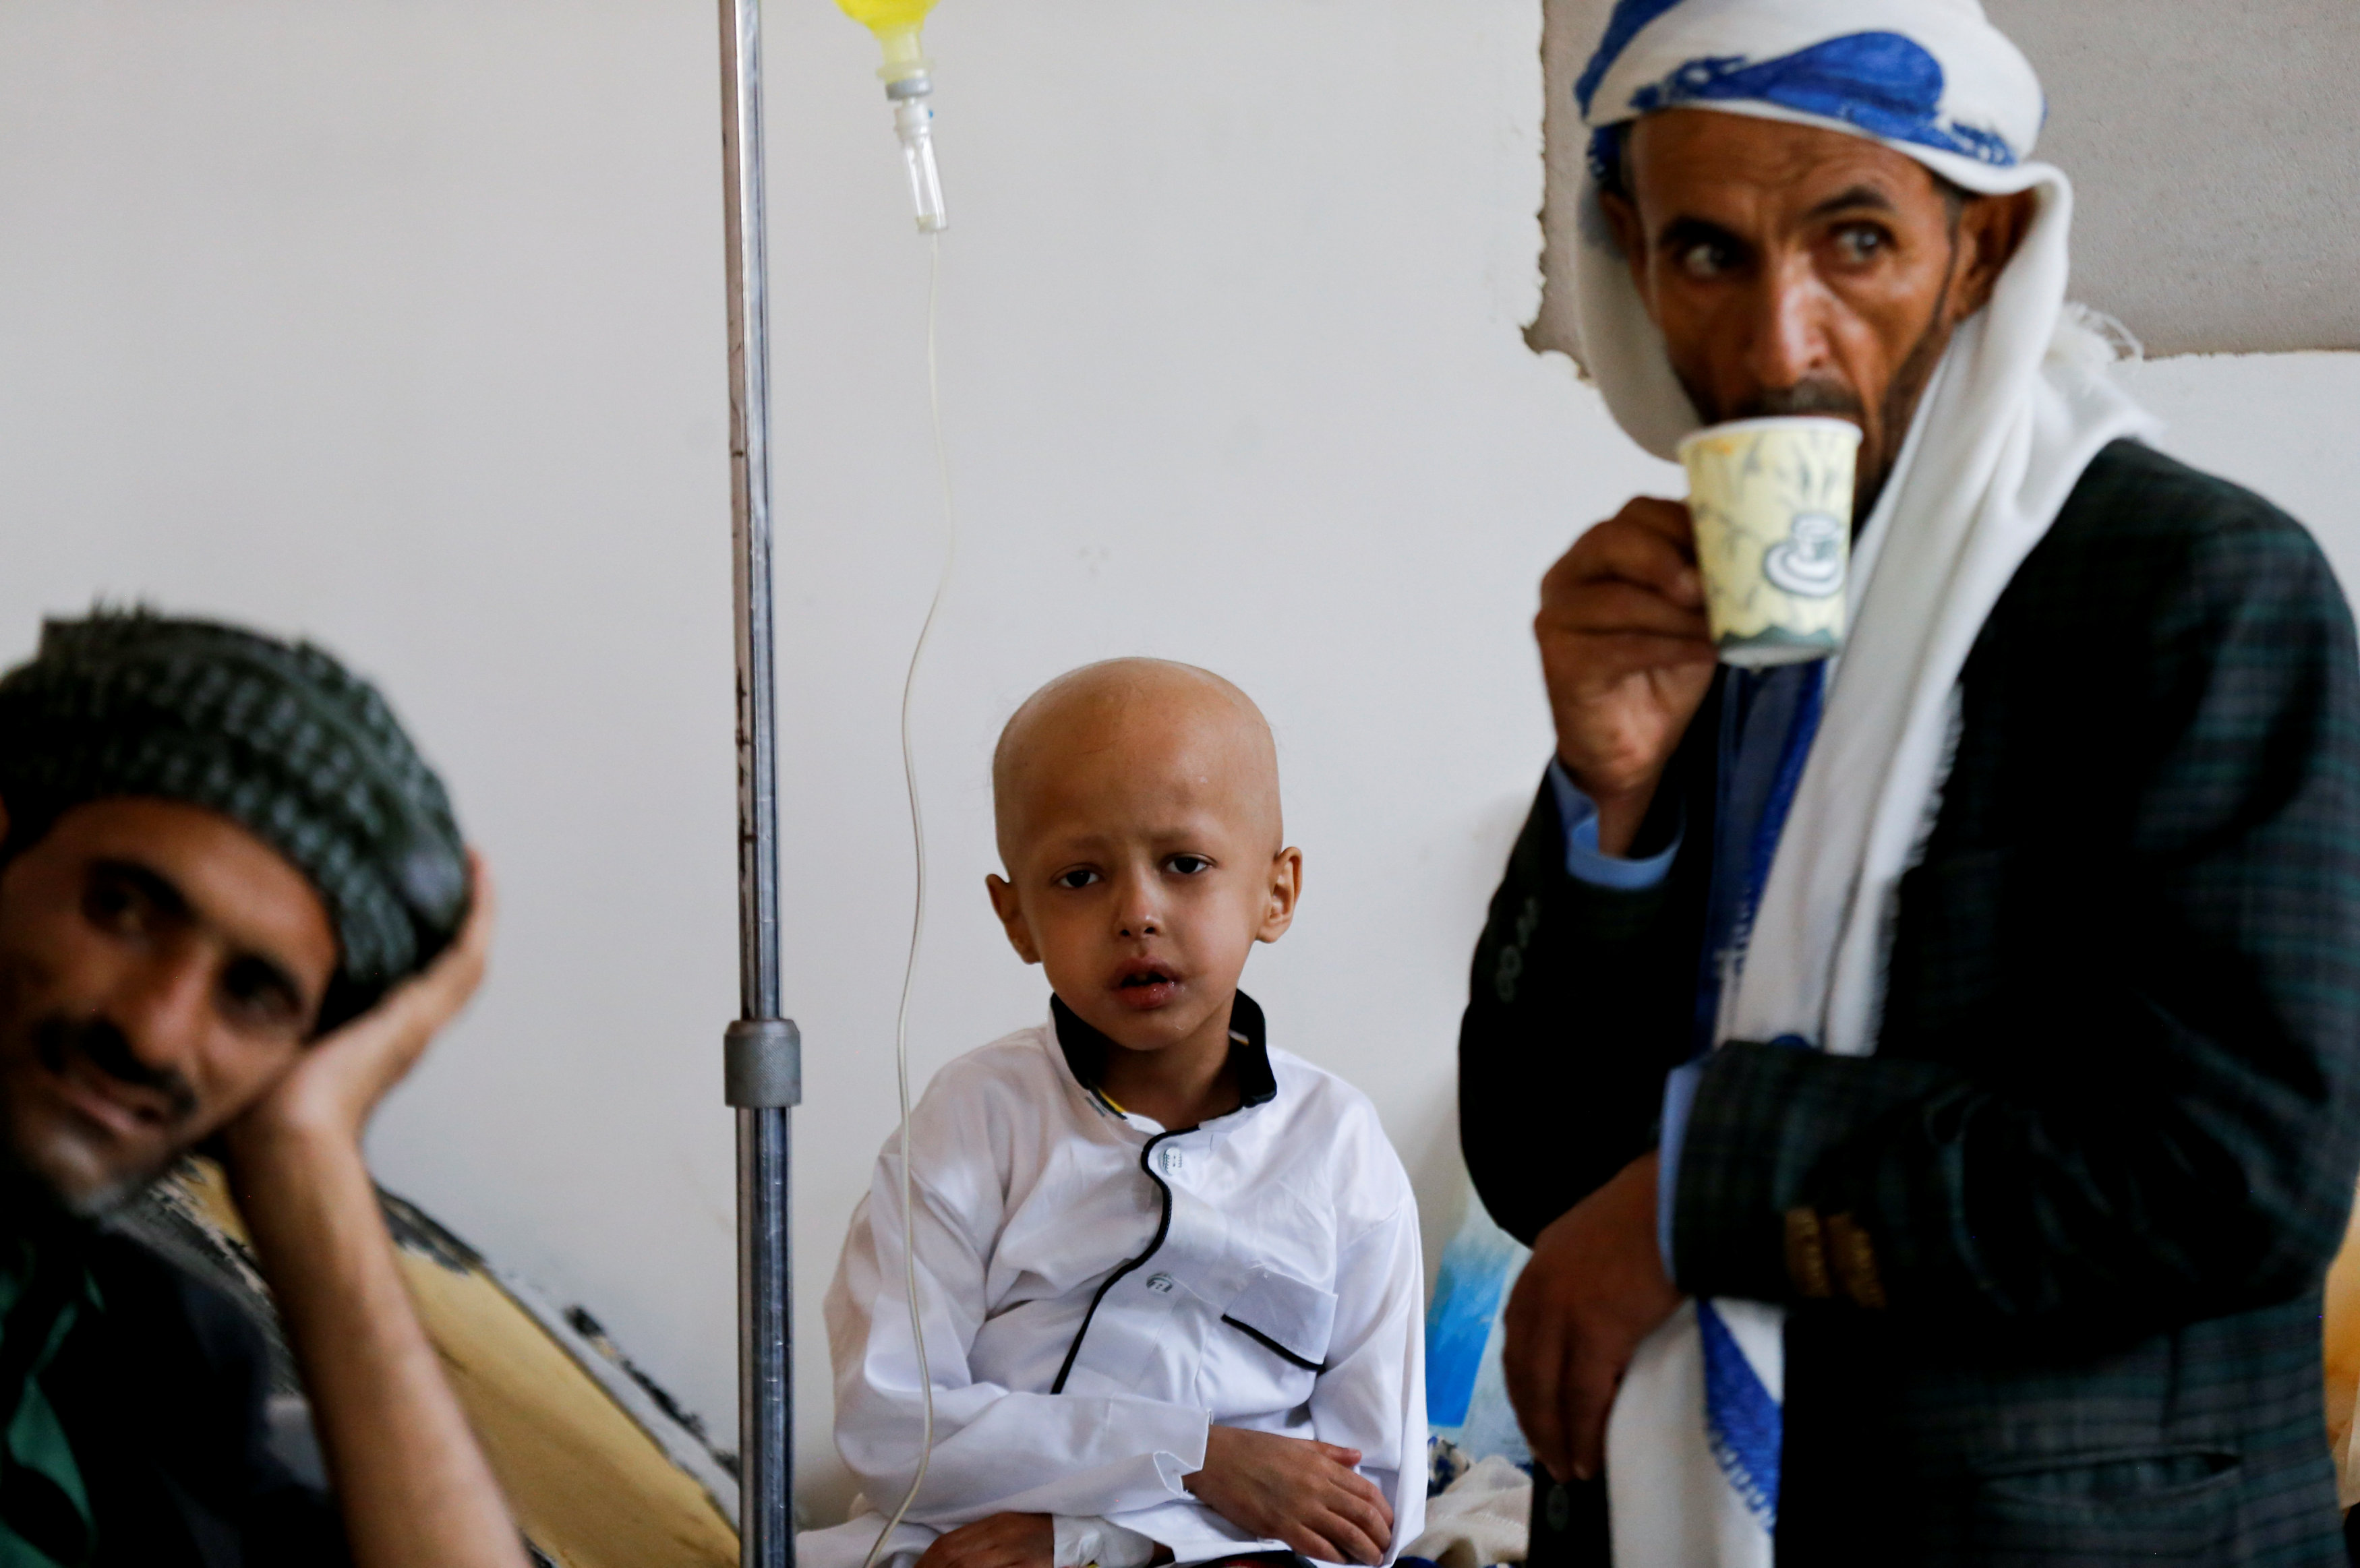 The Wider Image: Cancer patients - the other victims of Yemen's war